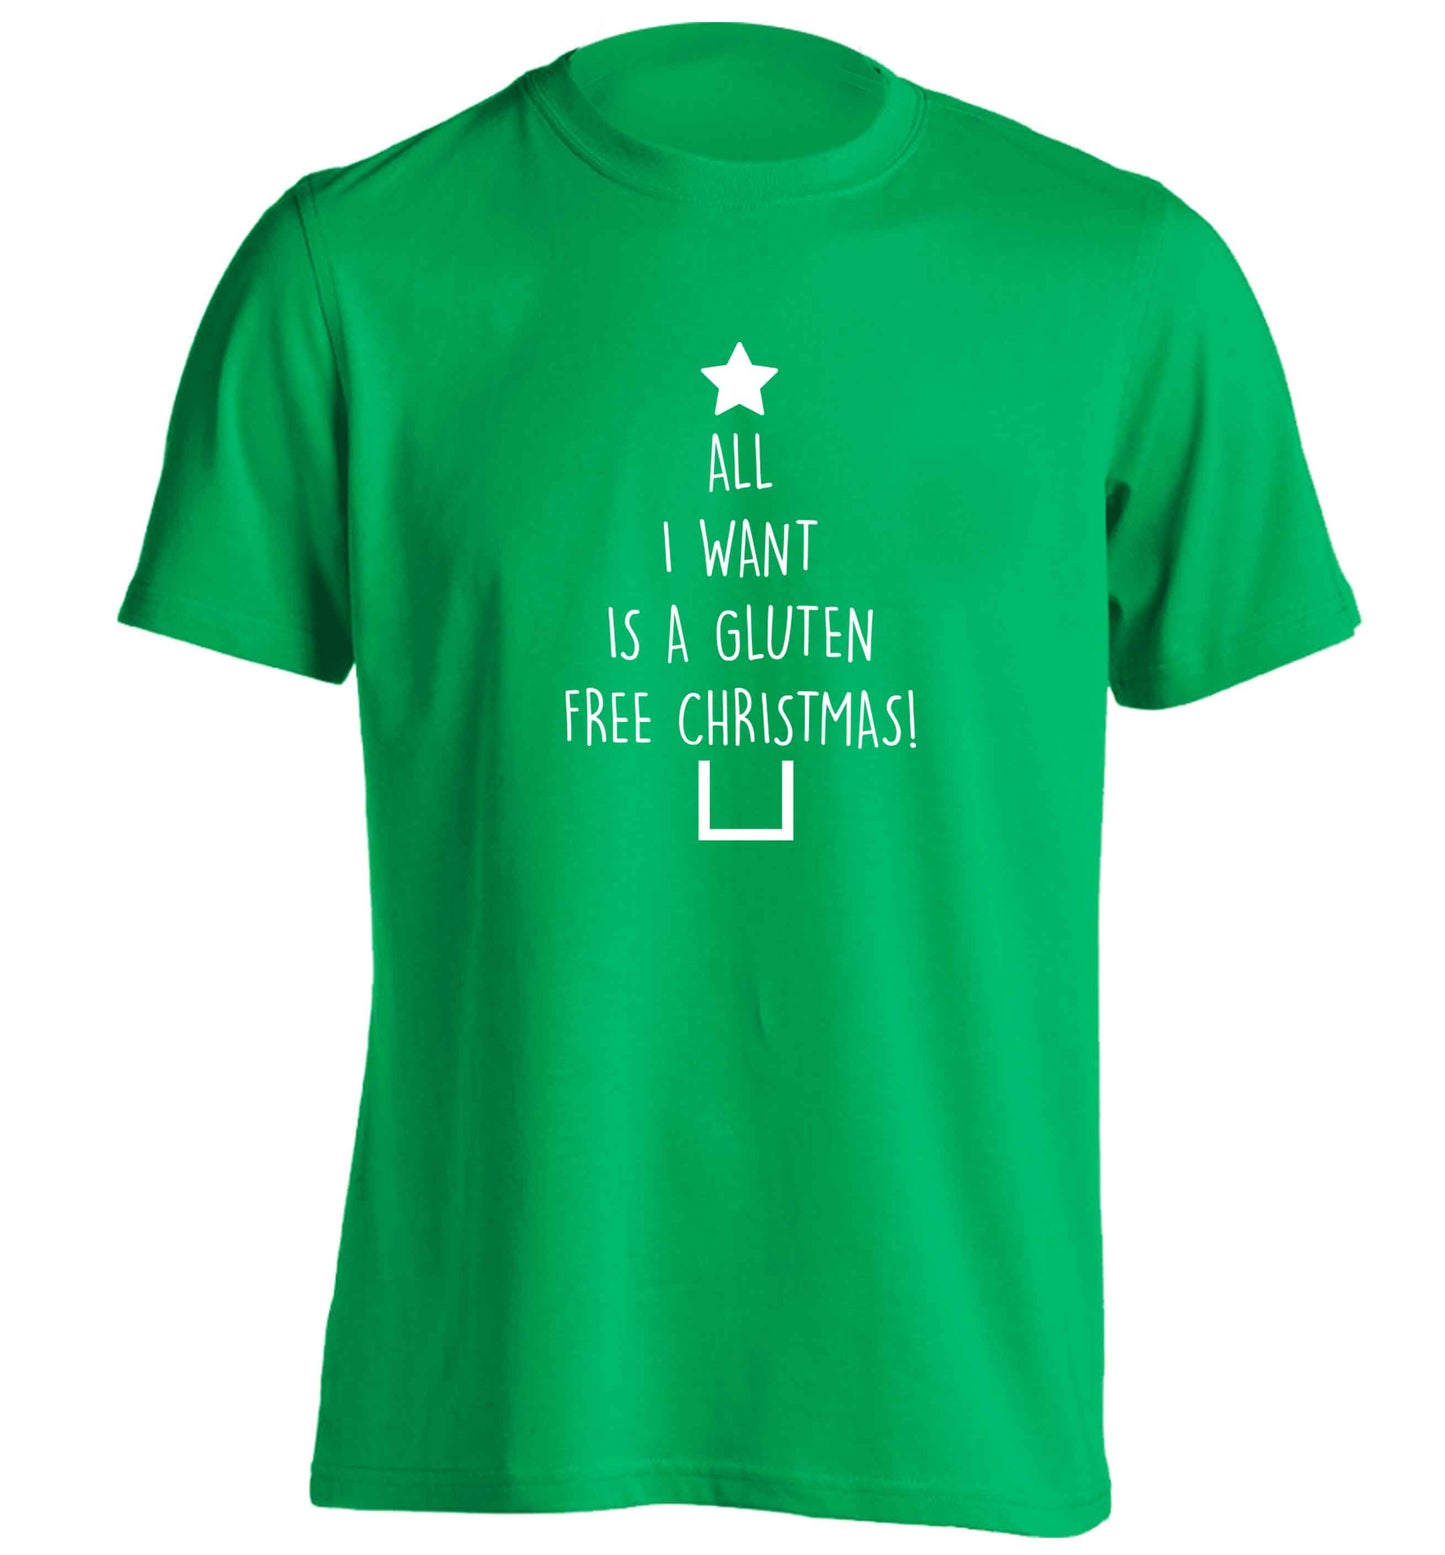 All I want is a gluten free Christmas adults unisex green Tshirt 2XL